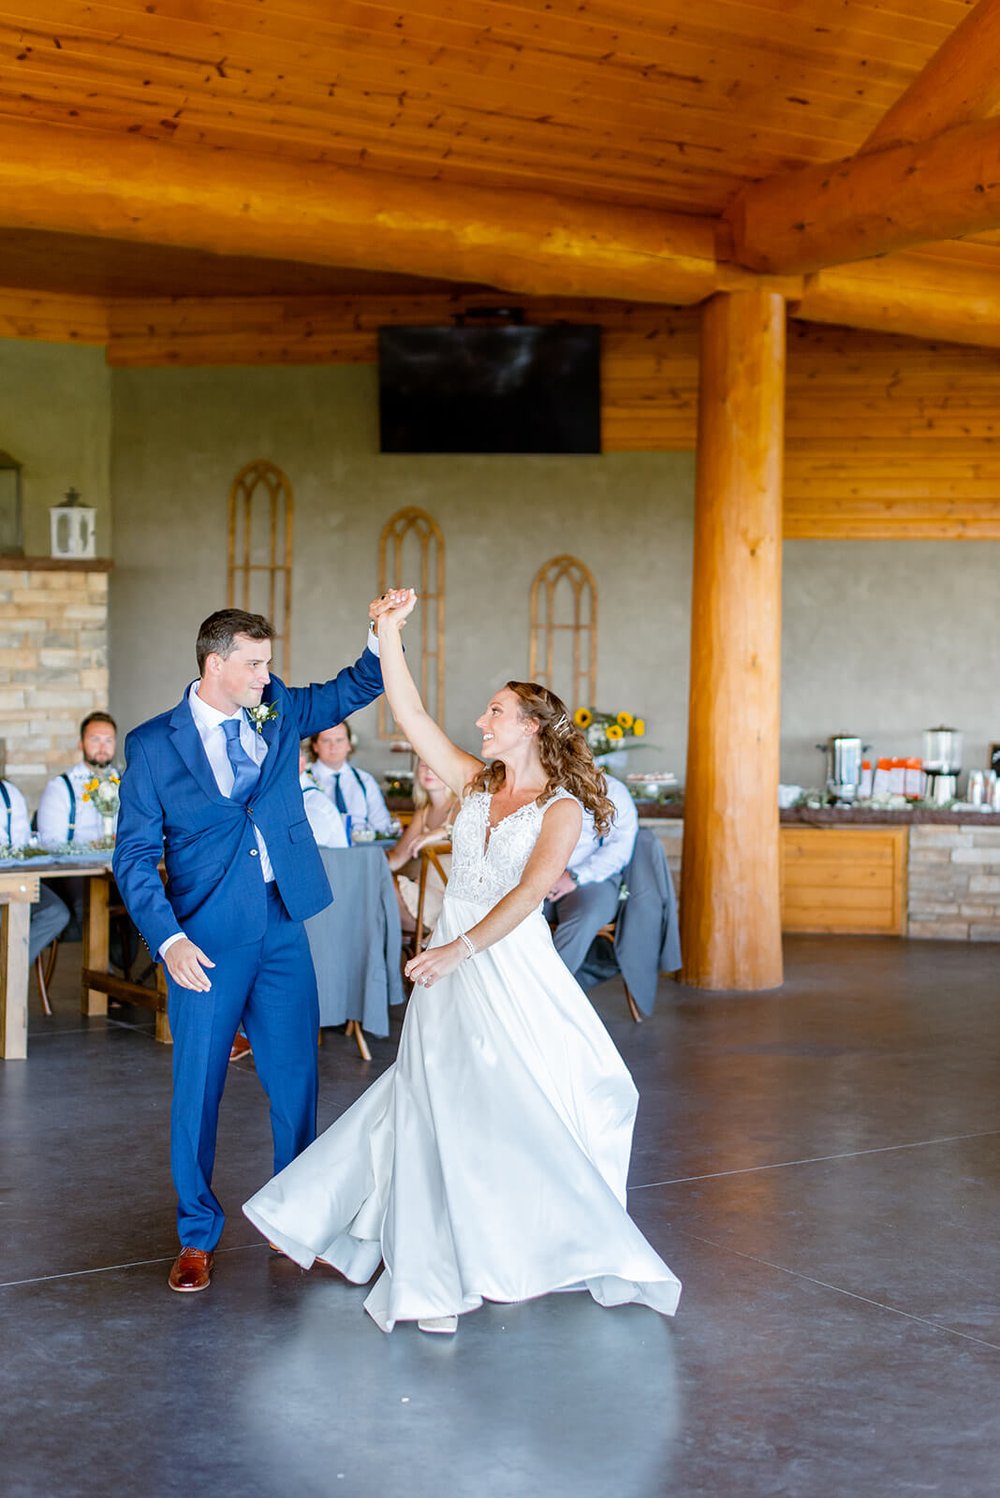 bride and groom first dance photo inspiration at point lookout vineyards wedding venue